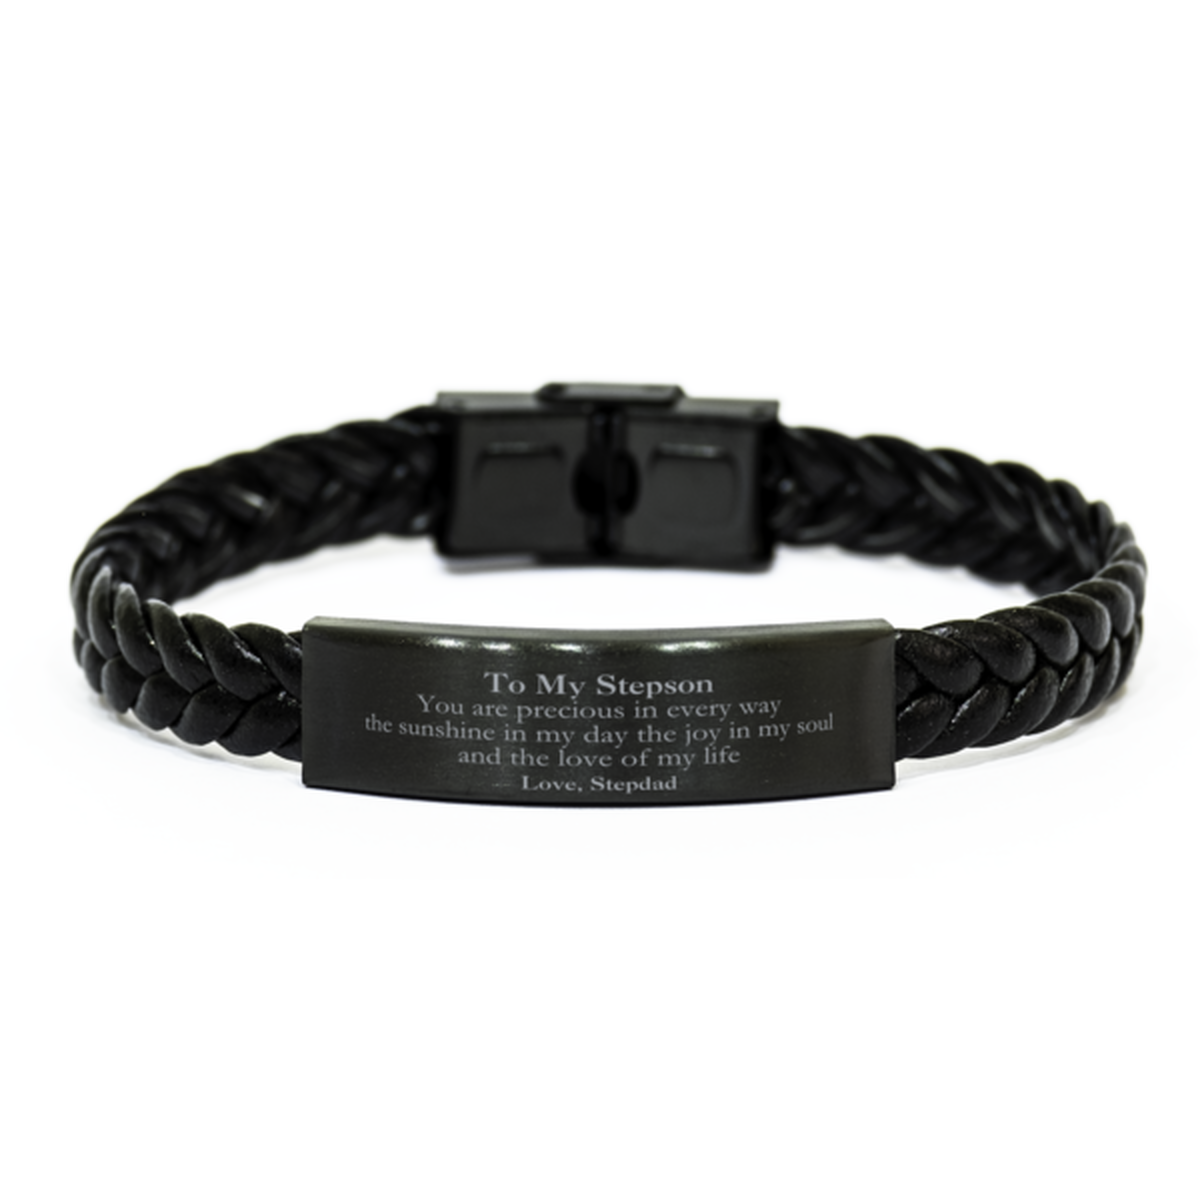 Graduation Gifts for Stepson Braided Leather Bracelet Present from Stepdad, Christmas Stepson Birthday Gifts Stepson You are precious in every way the sunshine in my day. Love, Stepdad